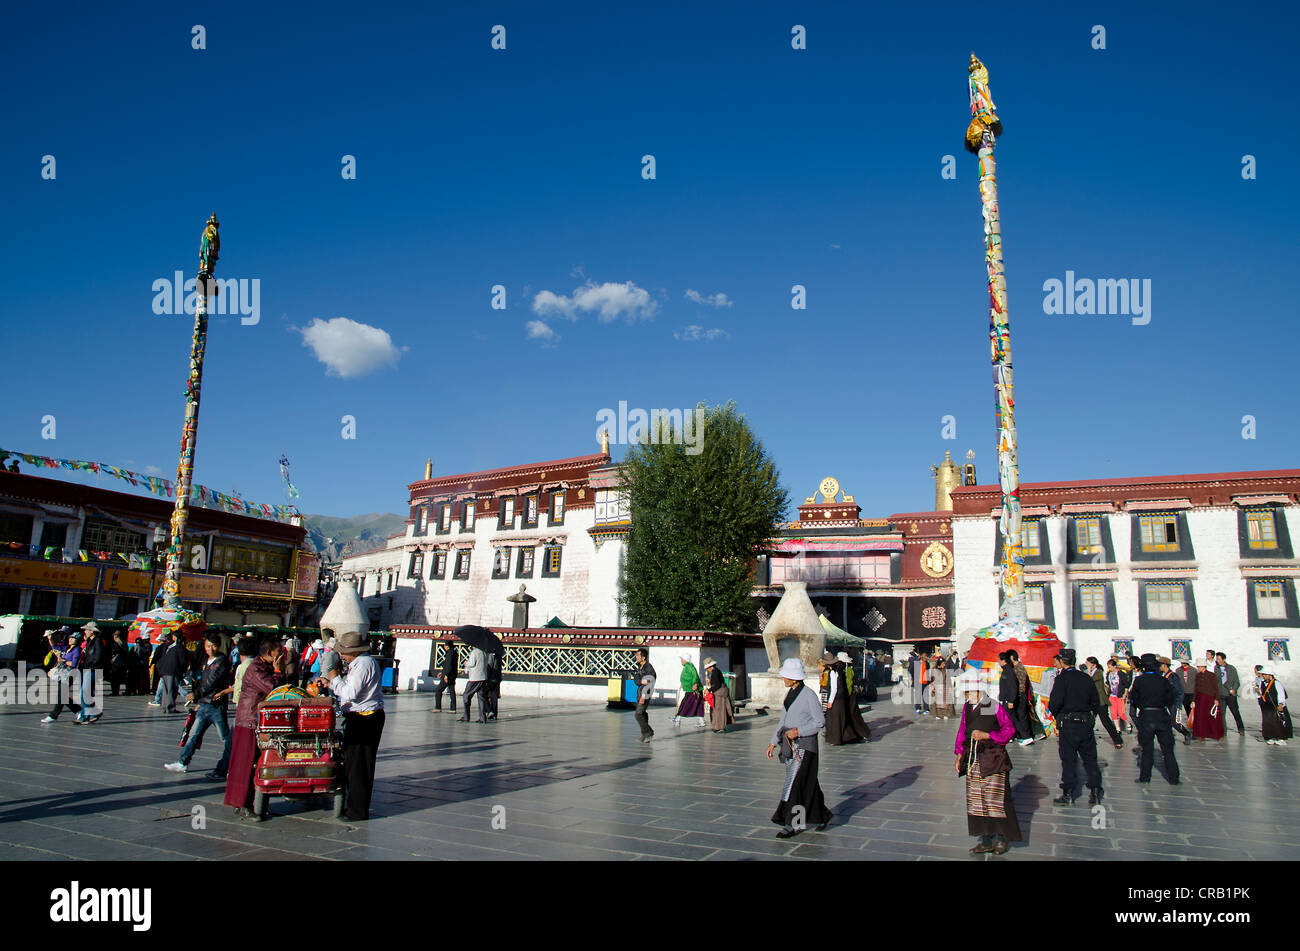 Tibetan Buddhism, pilgrims and monks in front of Jokhang Temple, Tibet's most holy temple, Barkhor, Lhasa, Tibet, China, Asia Stock Photo